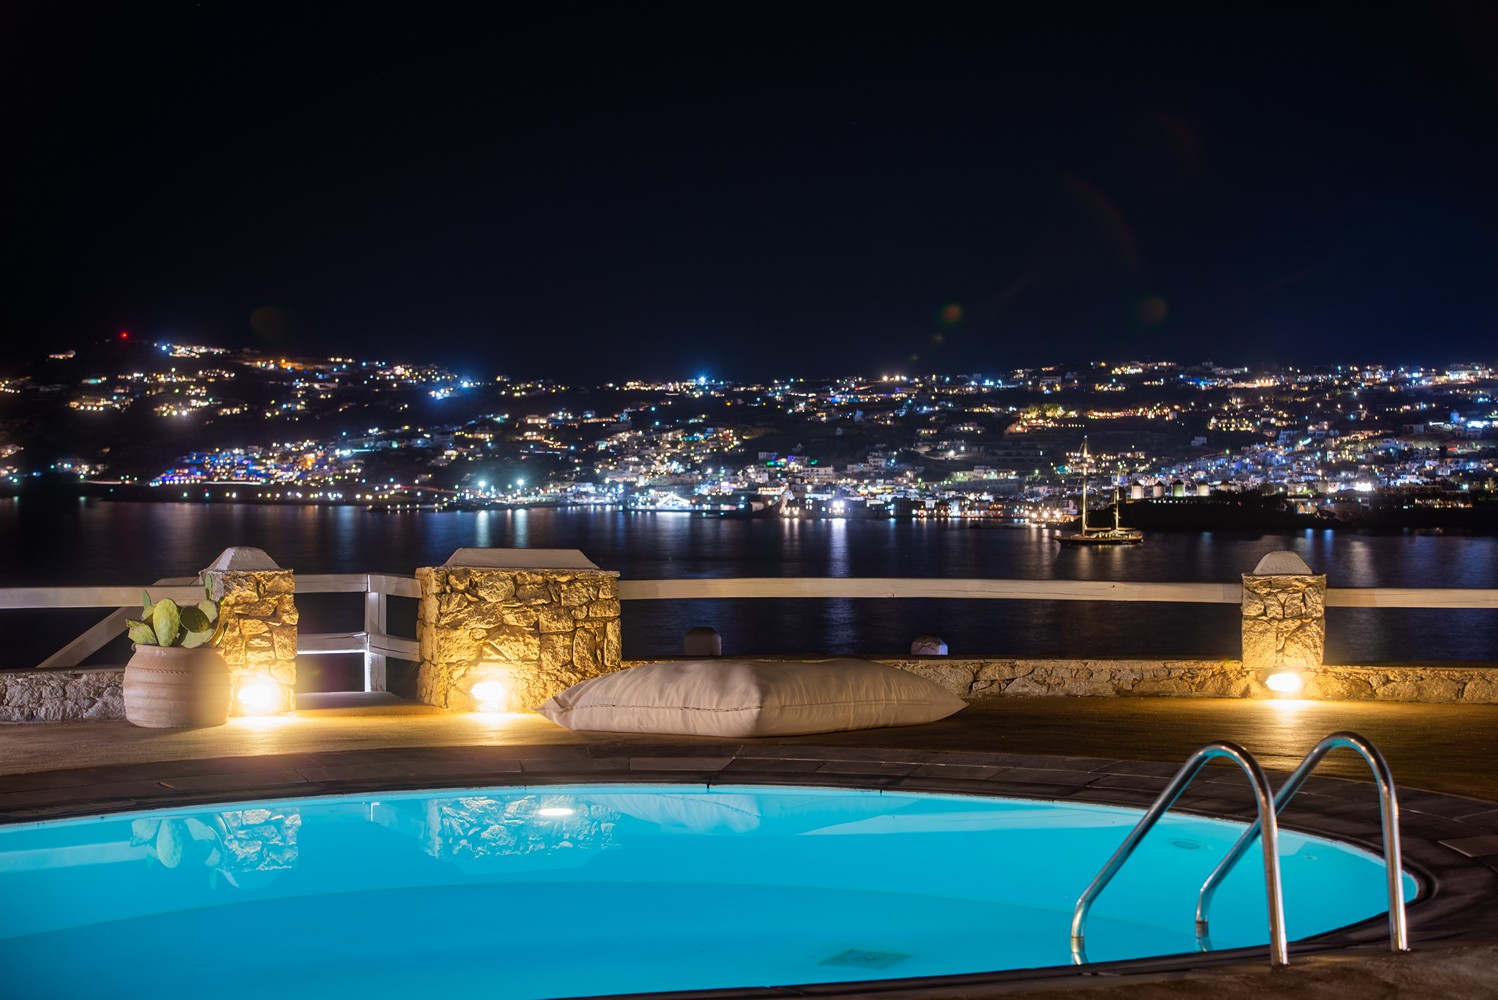 A pool and a city in the distance during the night